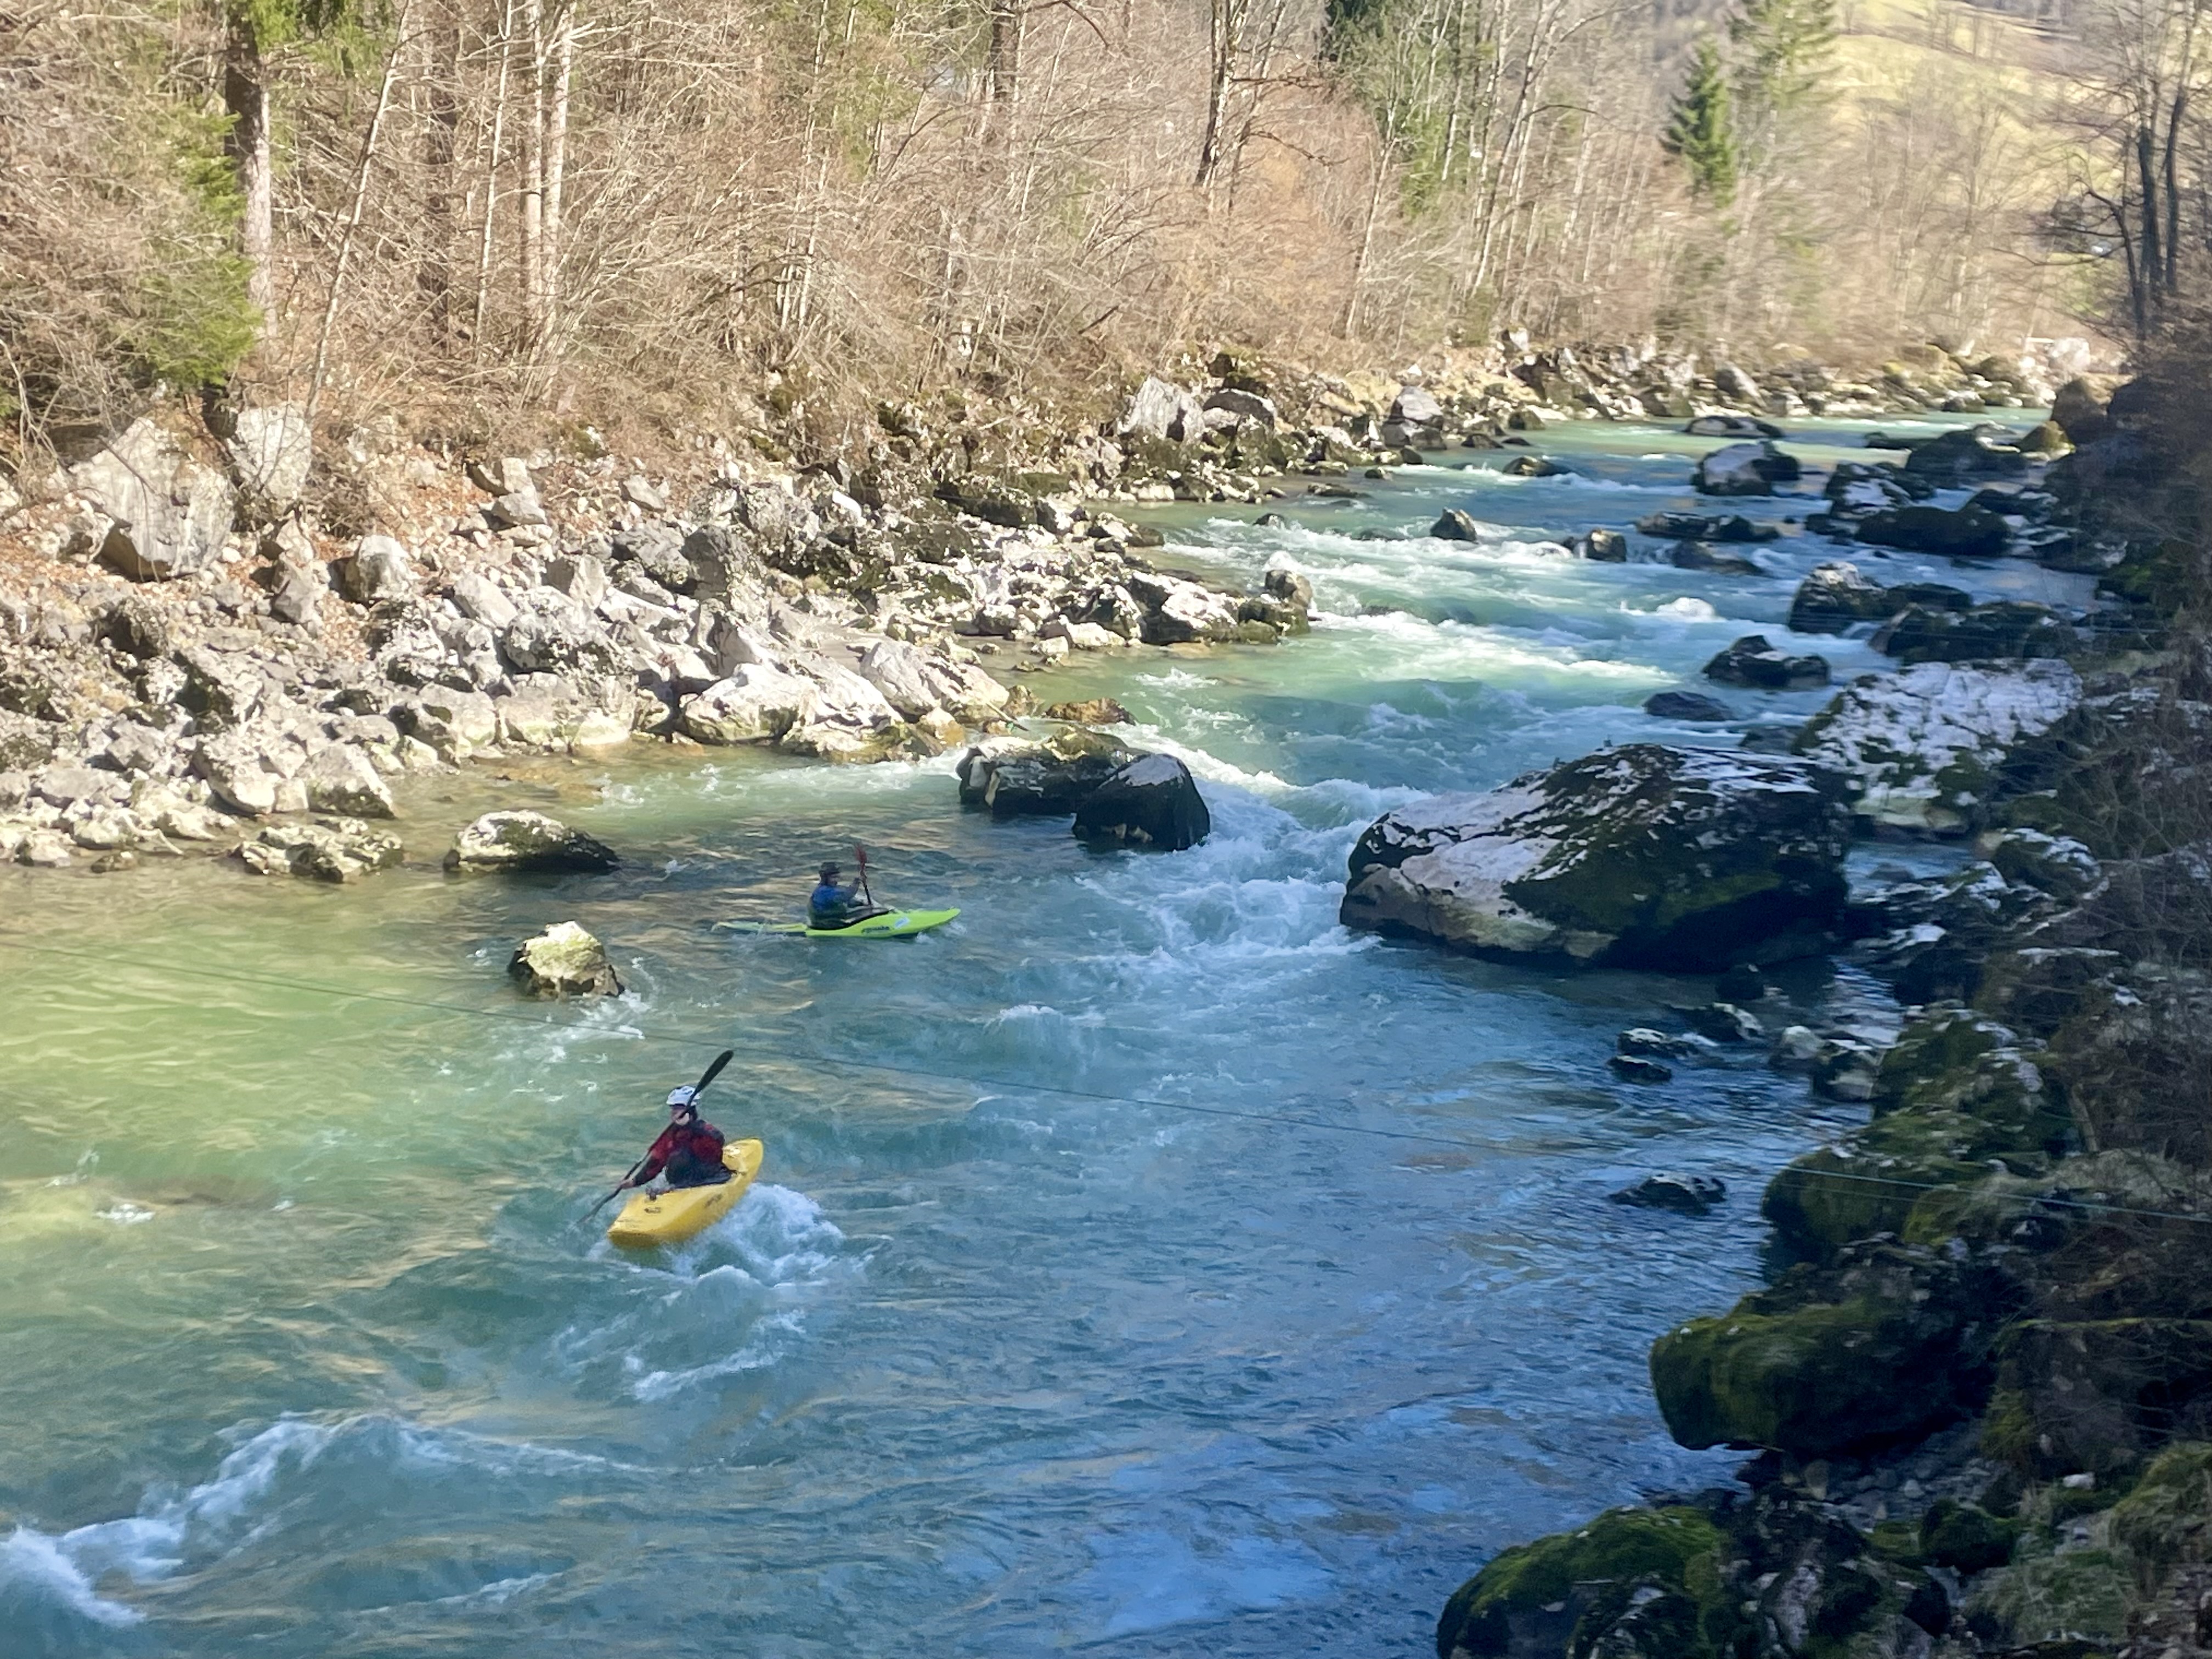 Image of the same two kayakers running the Slalomstrecke